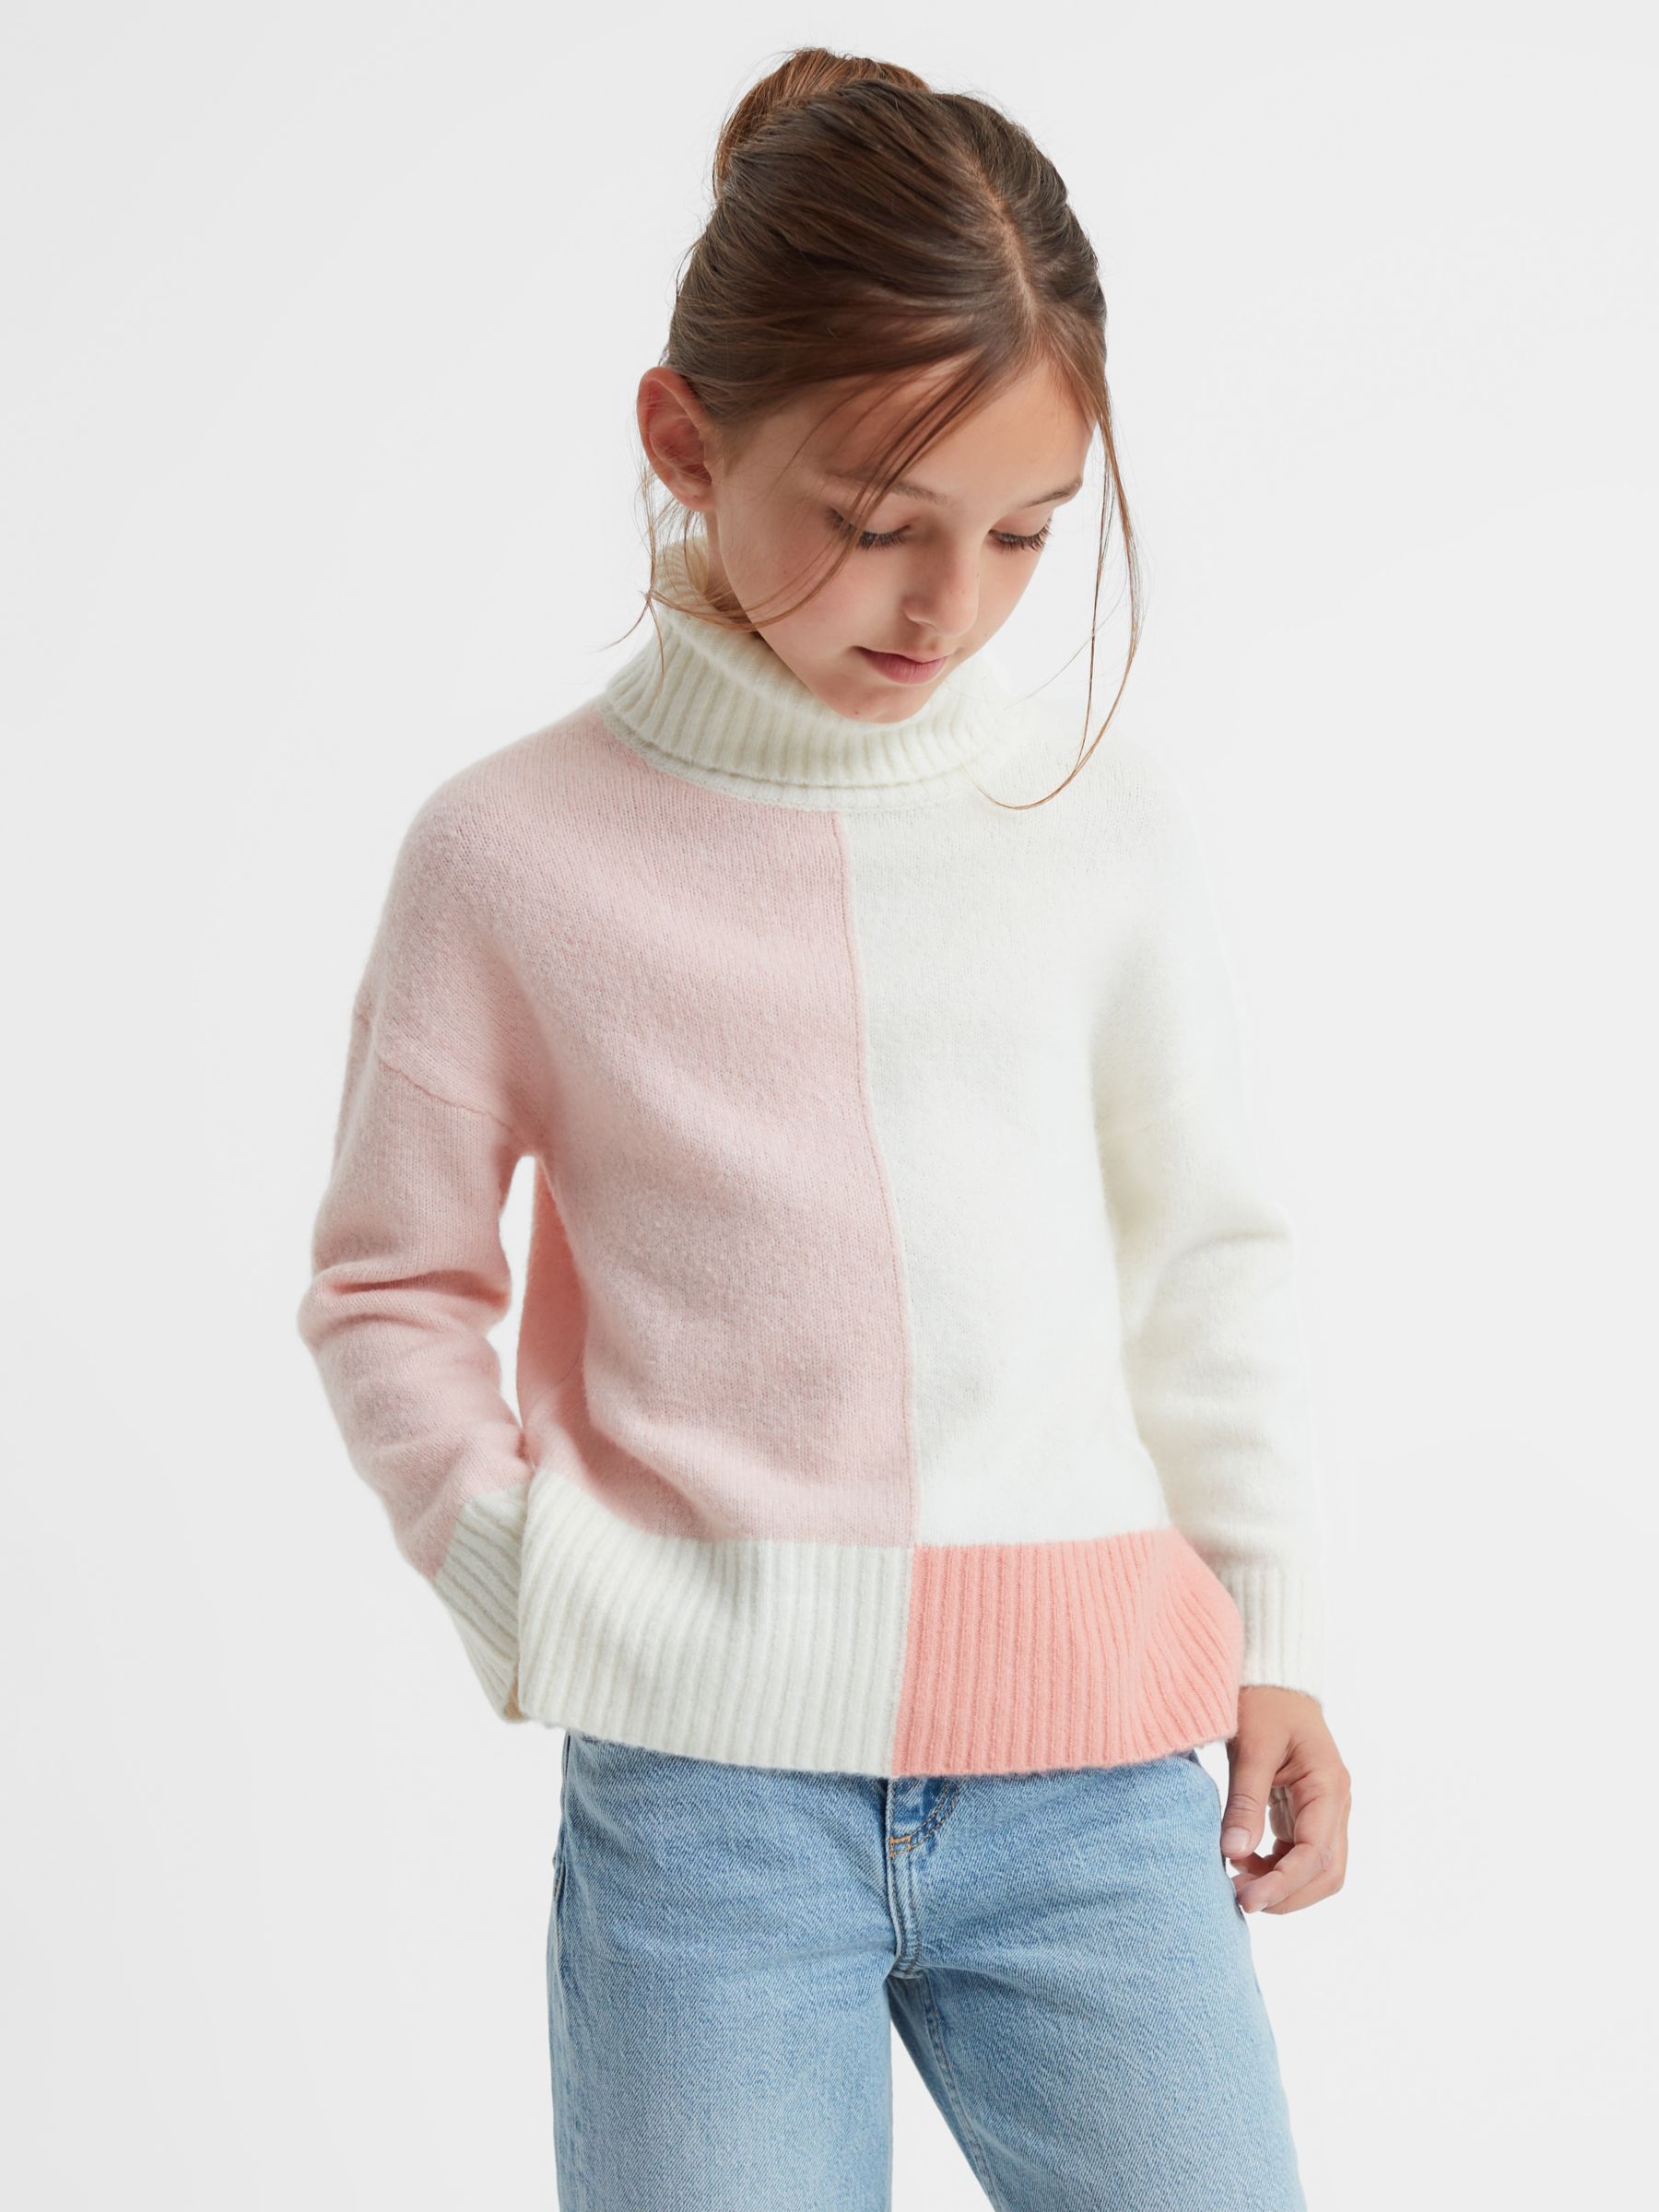 Reiss Kids' Gio Colour Block Knit Jumper, Ivory/Pink at John Lewis ...